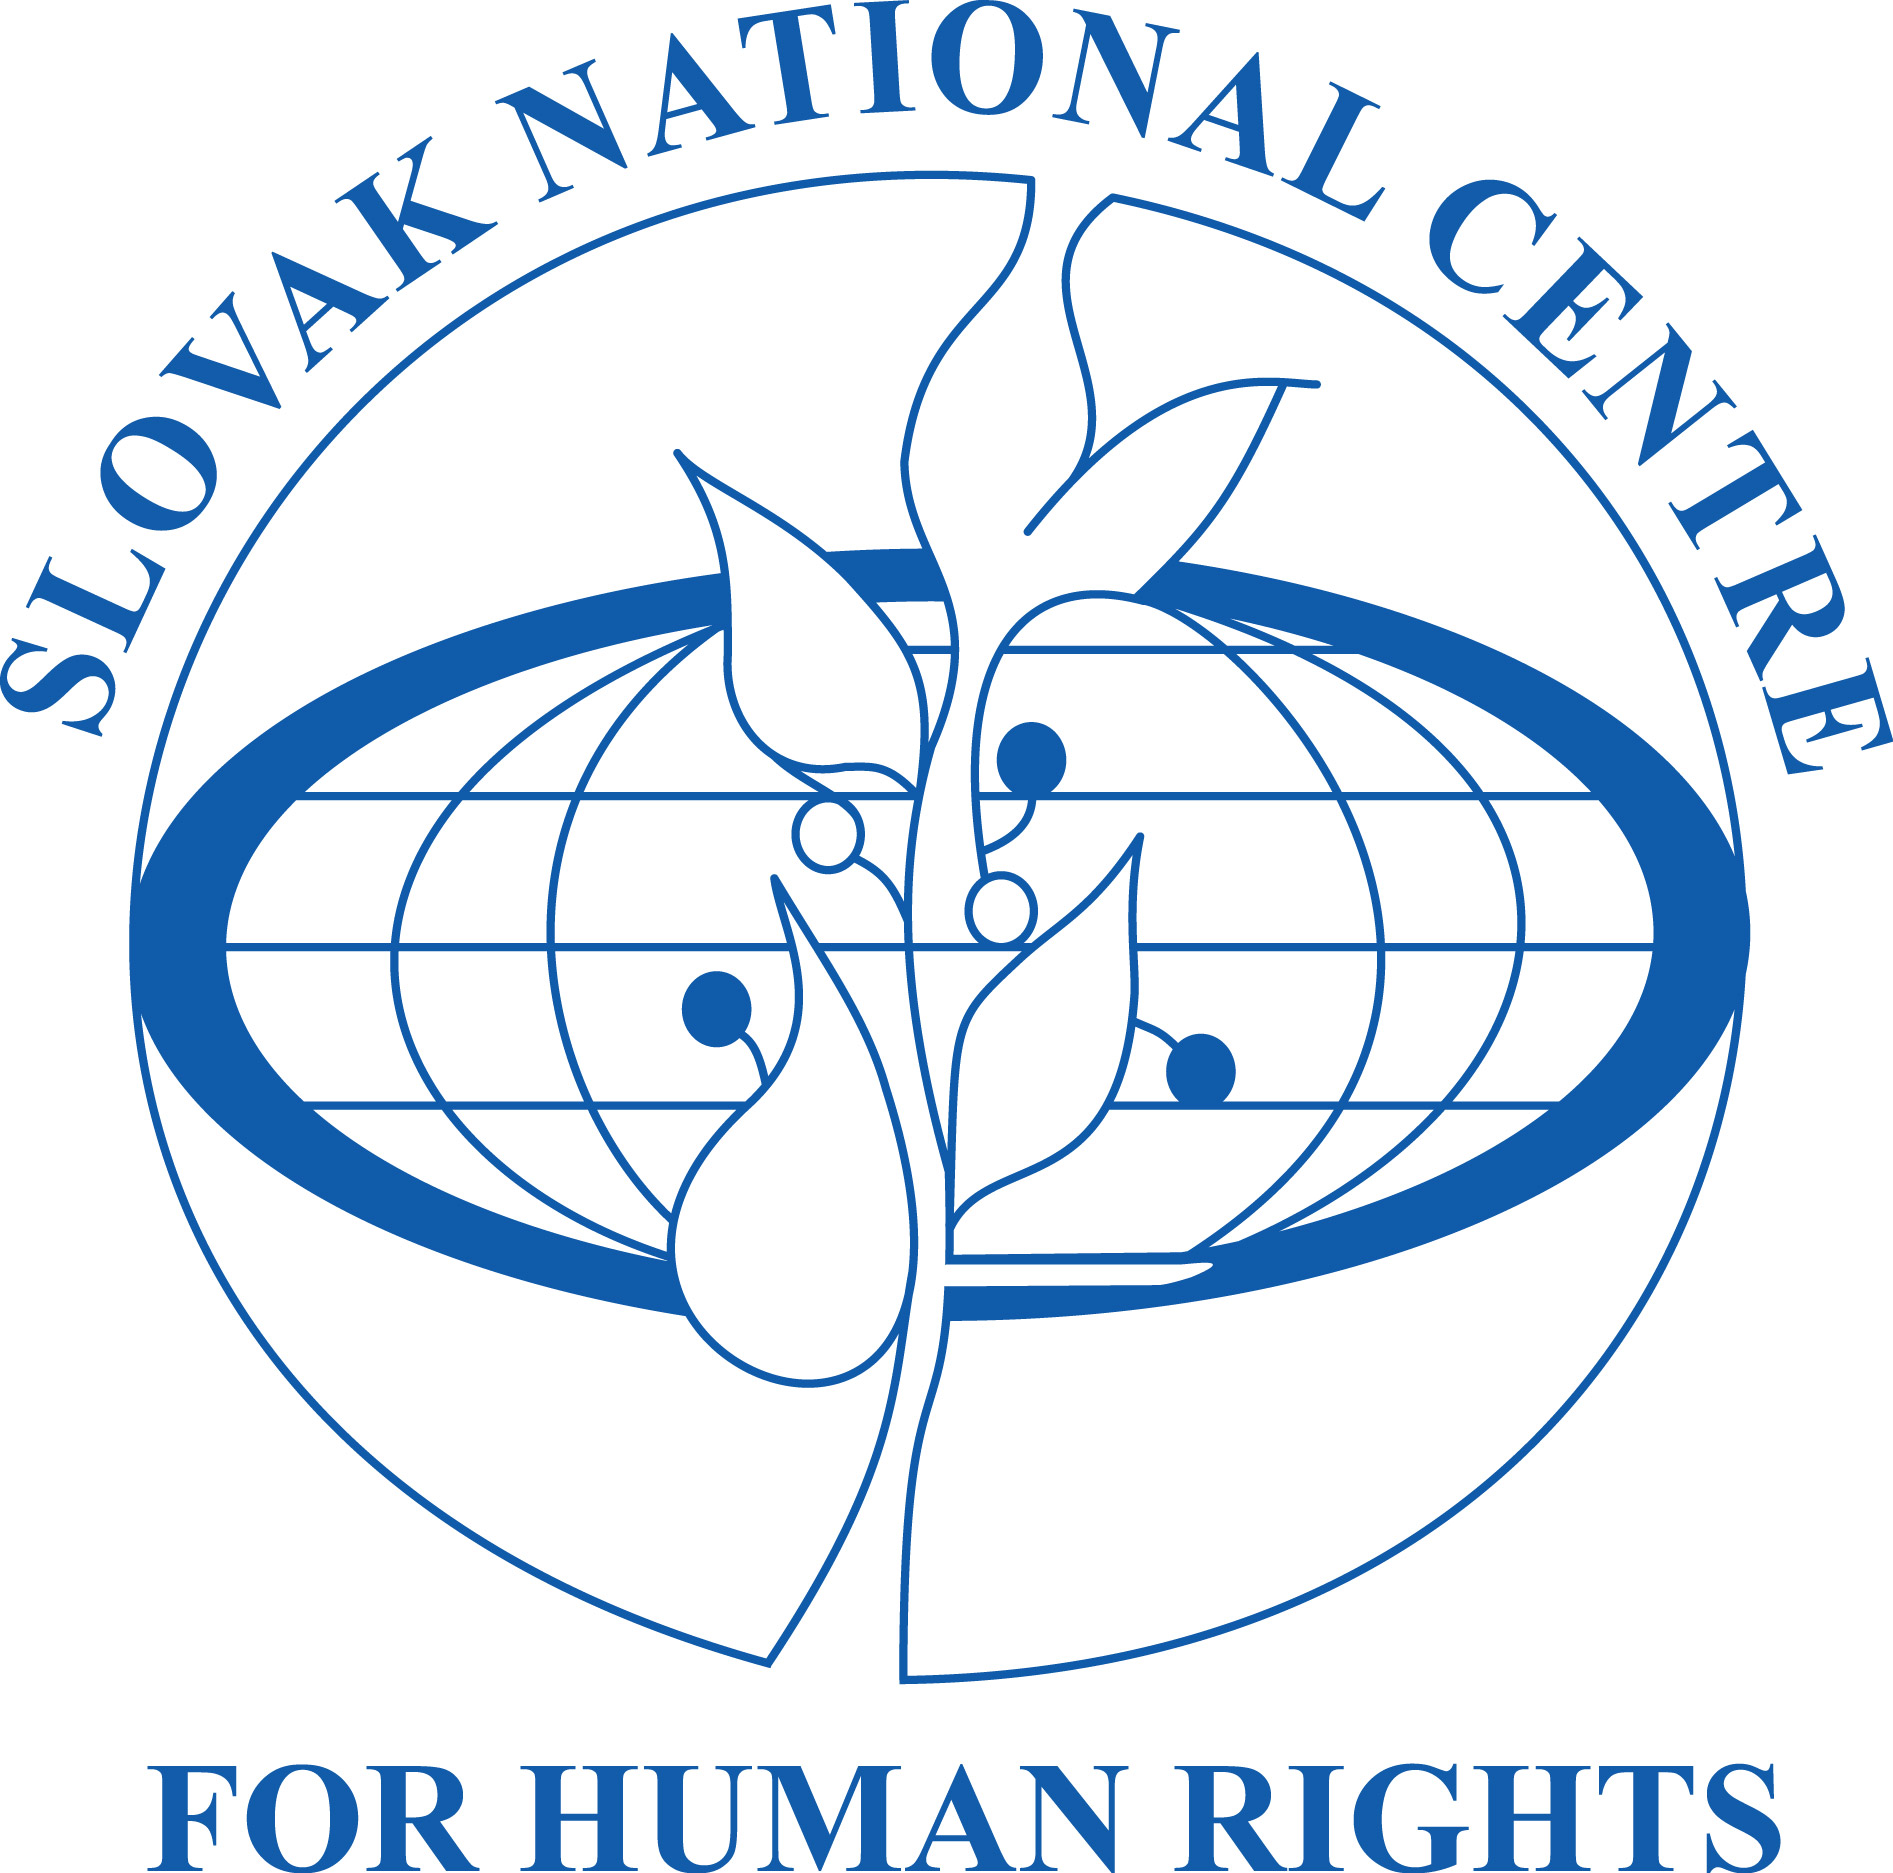 SLOVAK NATIONAL CENTRE FOR HUMAN RIGHTS INPUT OF THE